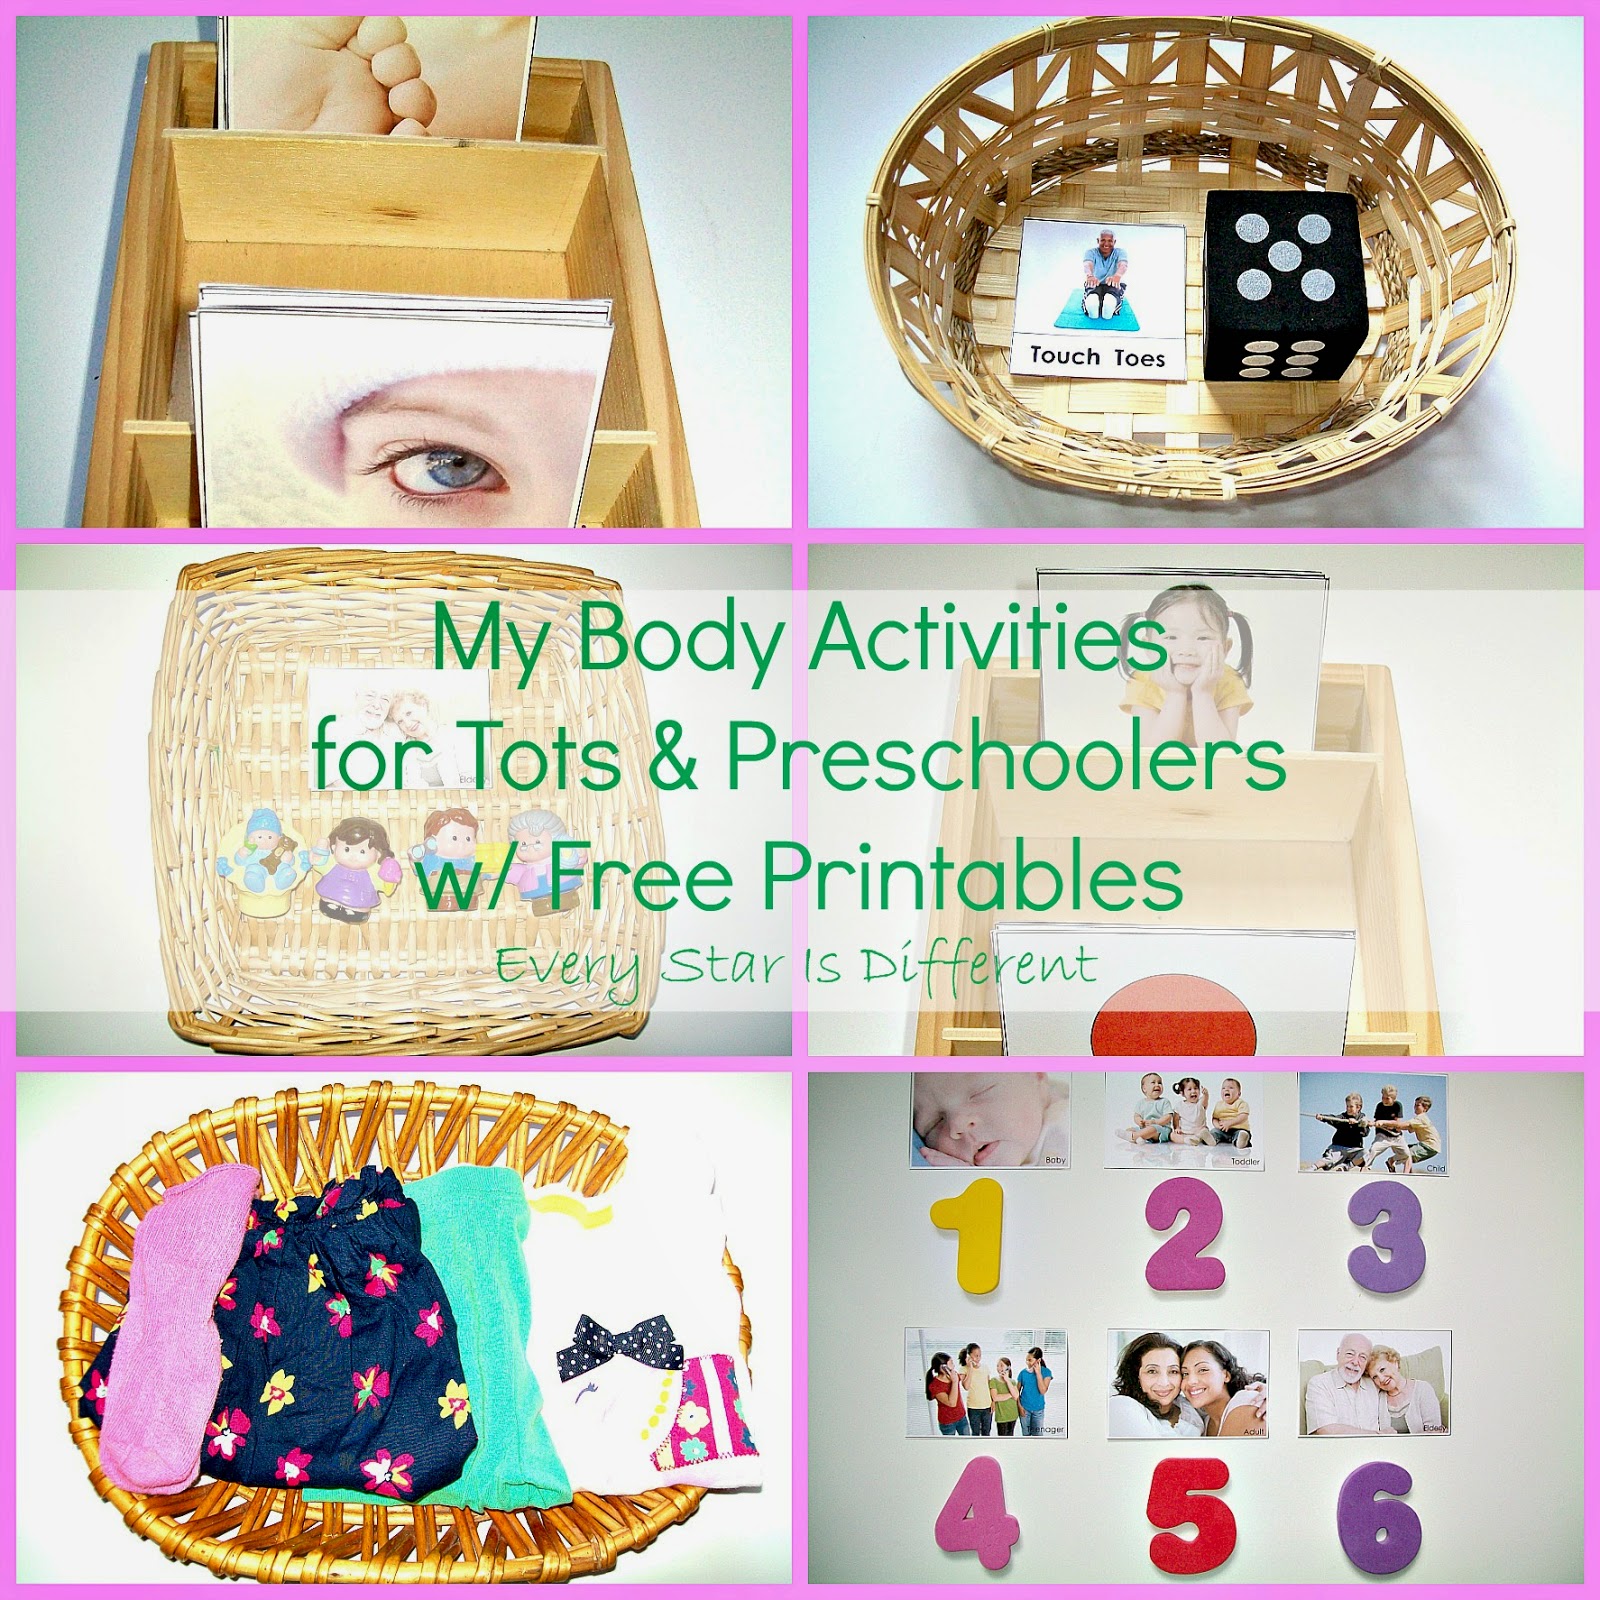 My Body Activities for Tots